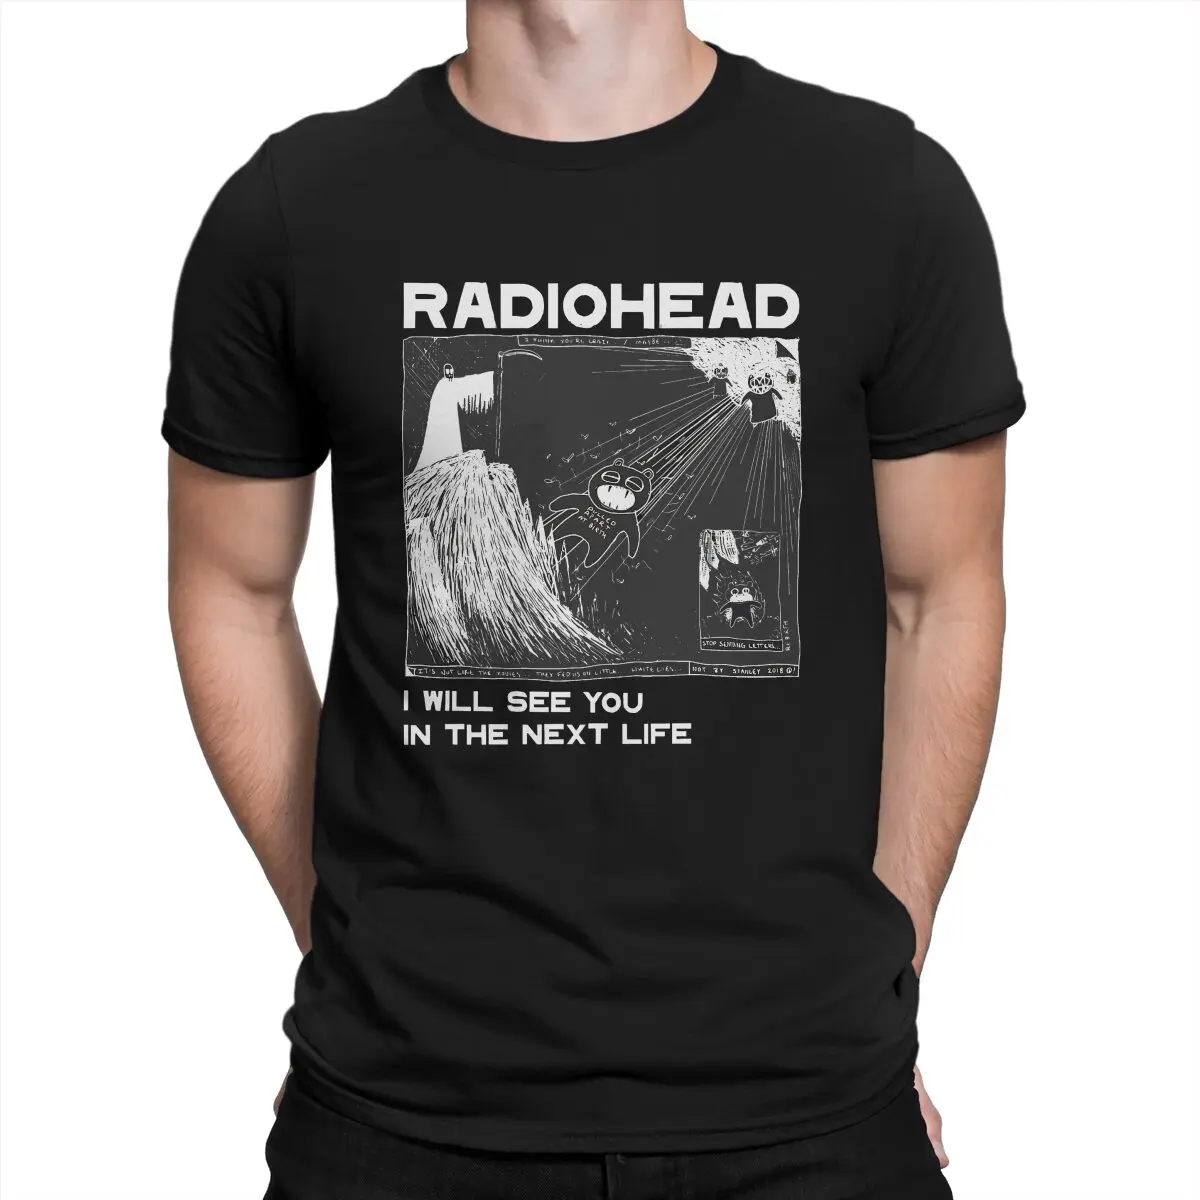 

I Will See You In The Next Life T-Shirt Men R-Radiohead Novelty Pure Cotton Tee Shirt Crew Neck Short Sleeve T Shirts Printed